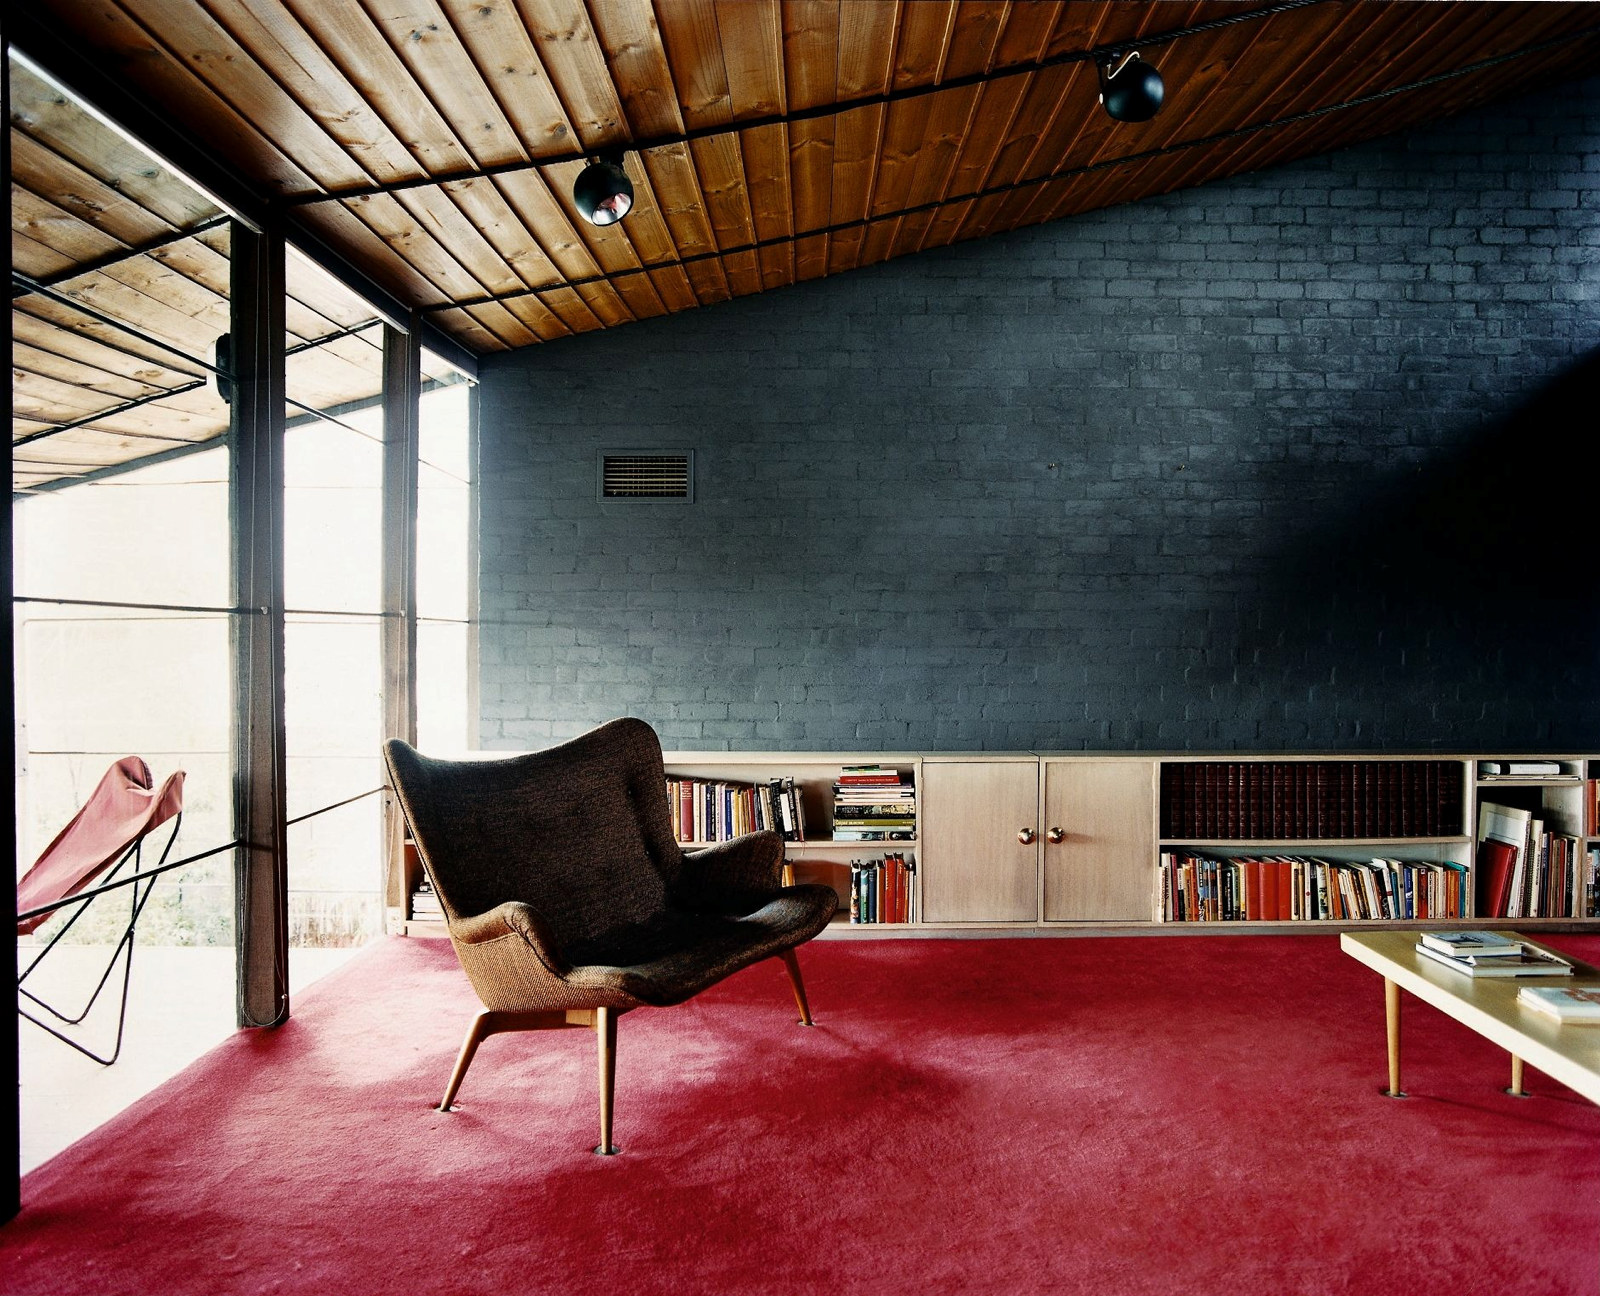 This is a colour photograph of a two seater couch in an open living space with deep red carpet and grey painted brick walls